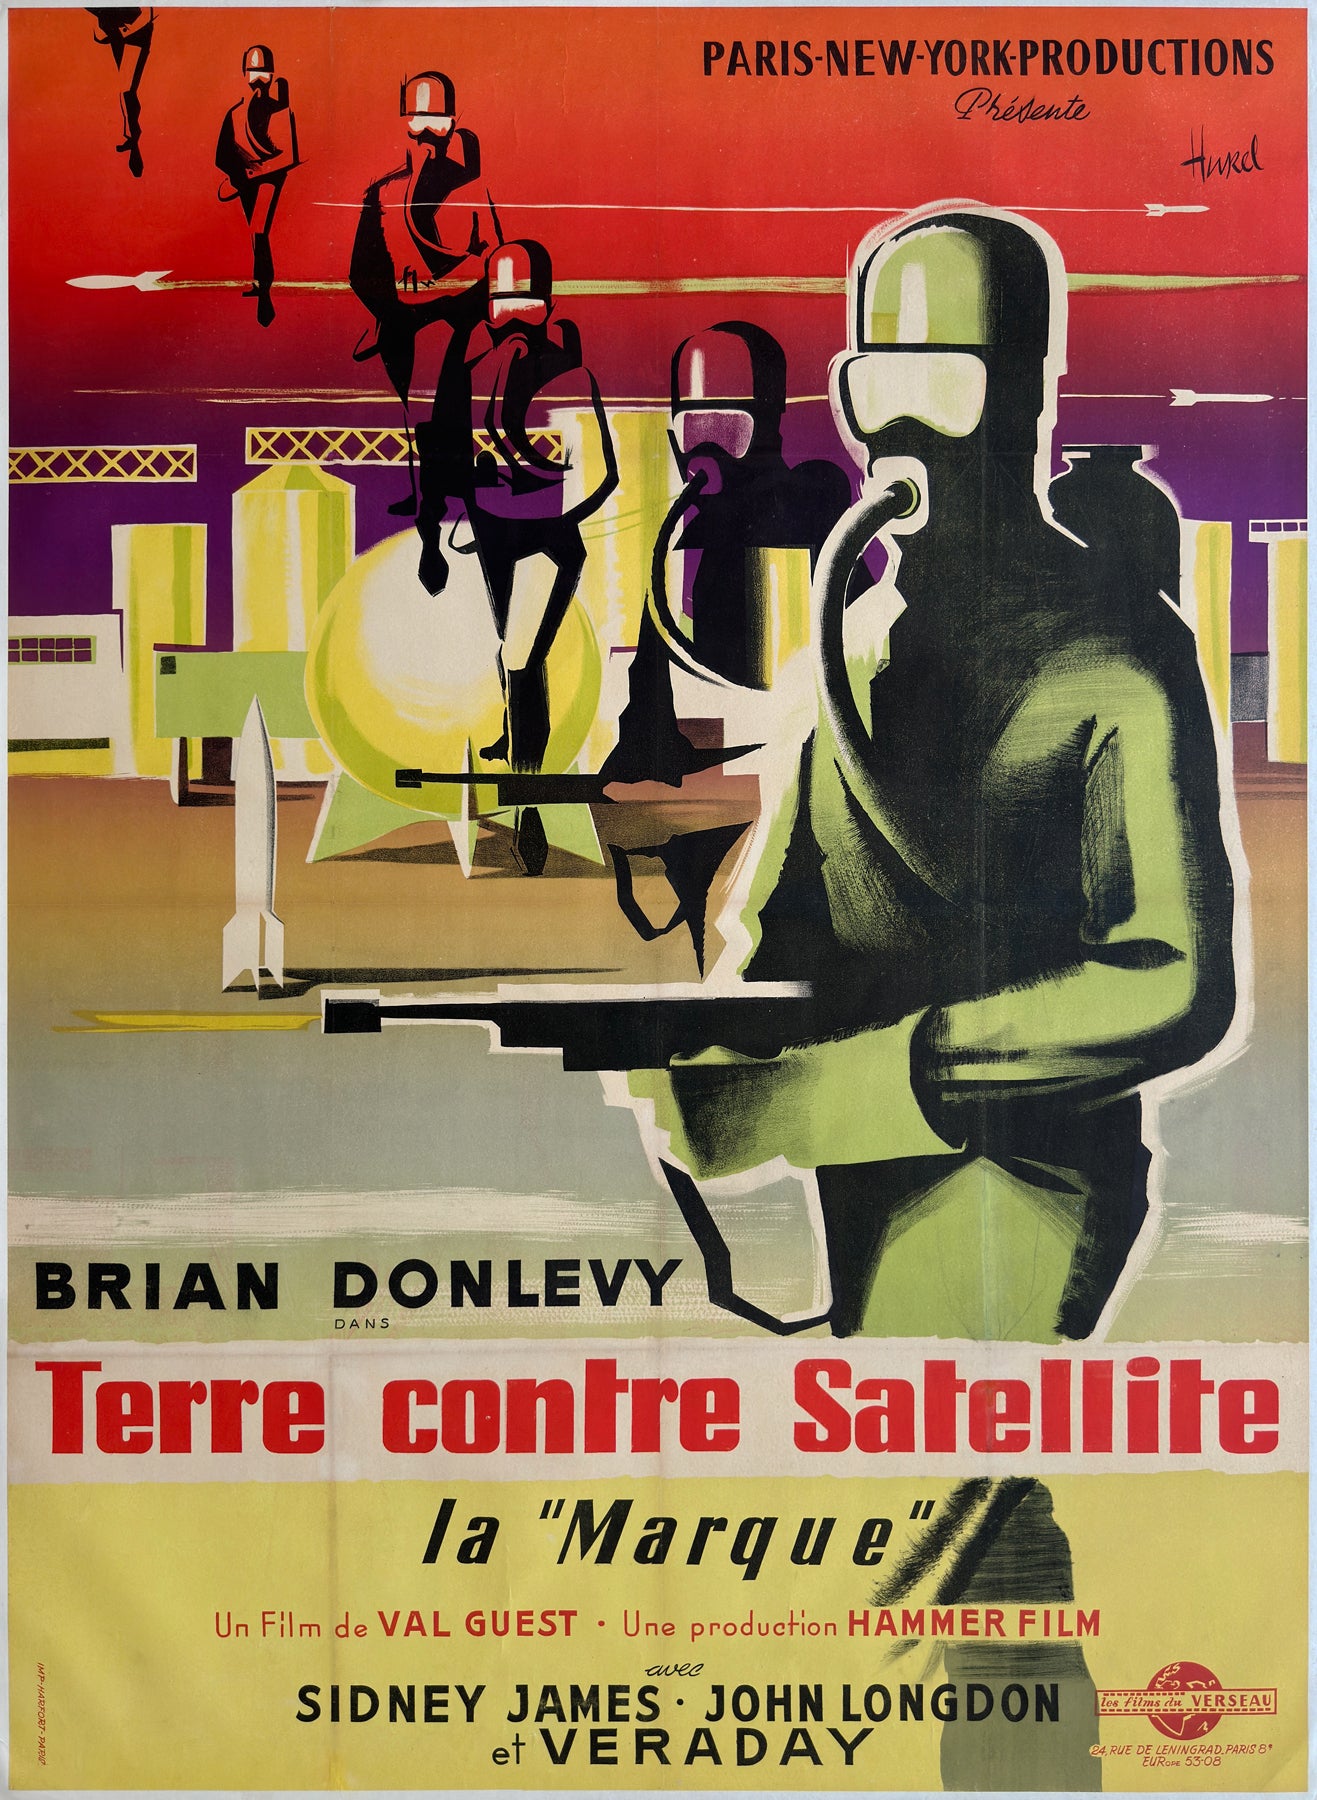 Quatermass II: Enemy from Space 1958 French Grande Film Movie Poster, Clement Hurel